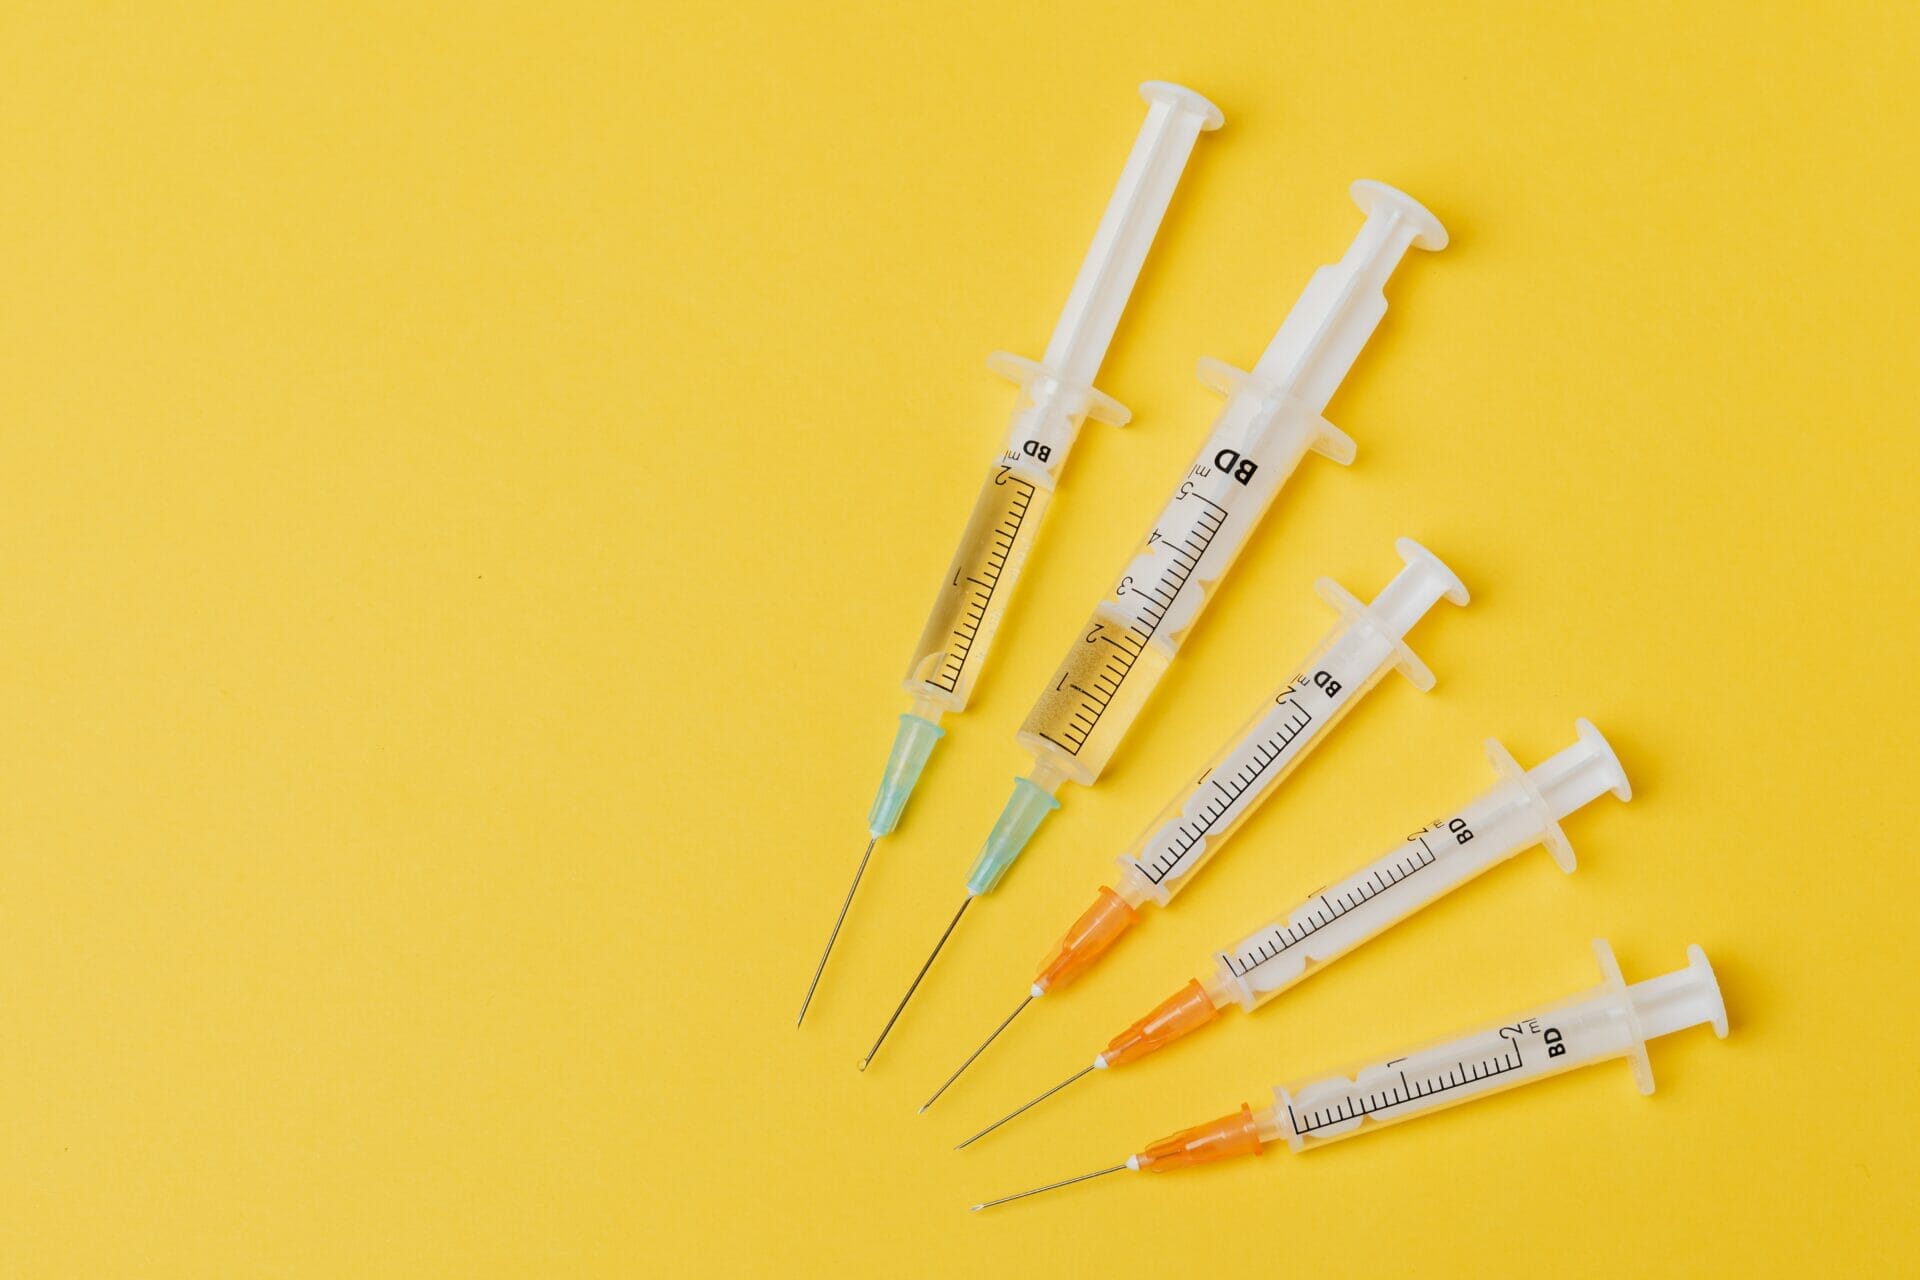 Medical syringes on a plain yellow background